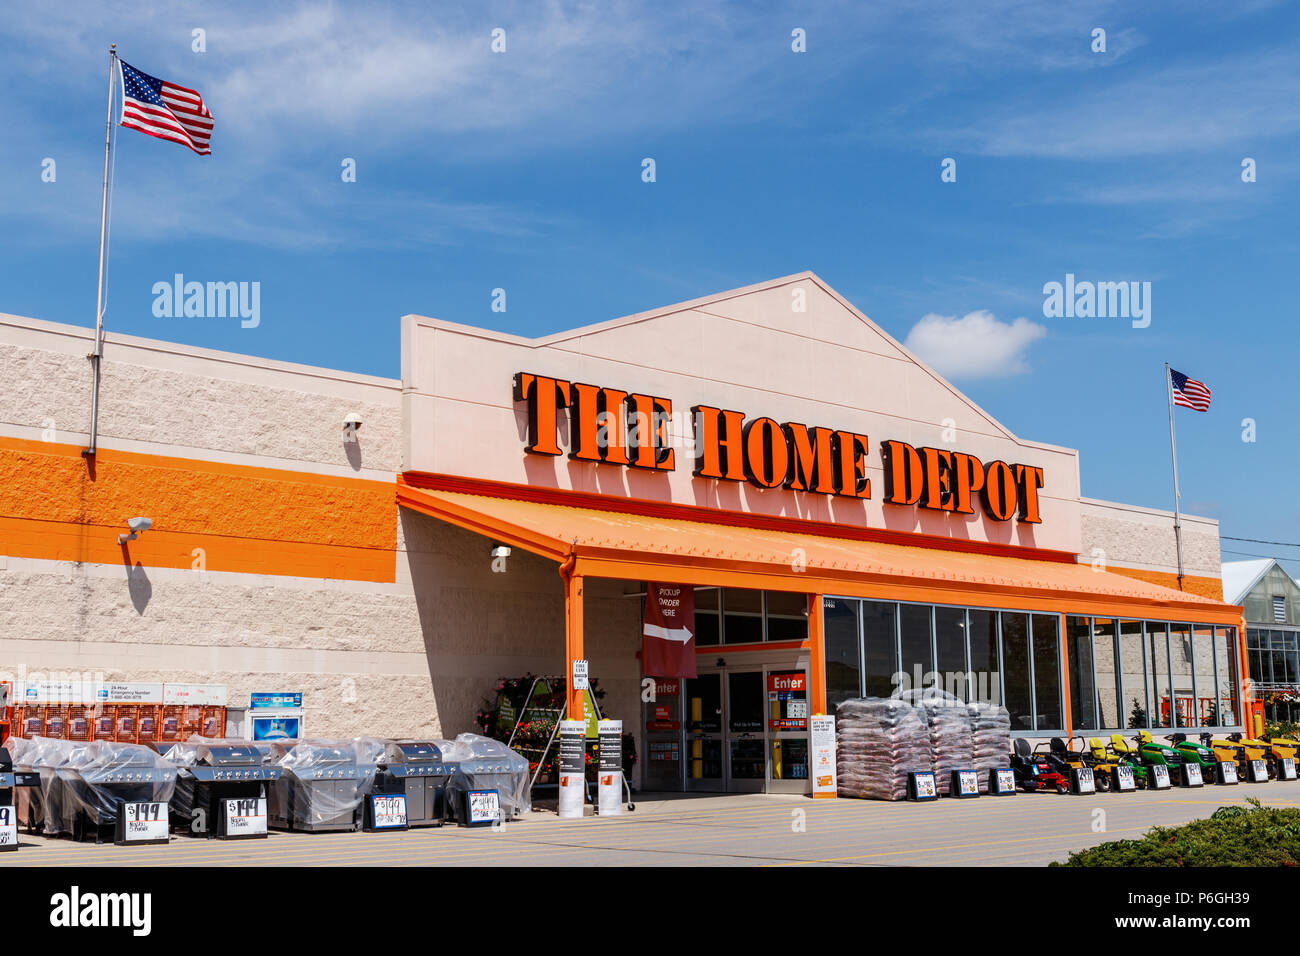 Ft. Wayne - Circa June 2018: Home Depot Location flying the American flag. Home Depot is the Largest Home Improvement Retailer in the US II Stock Photo